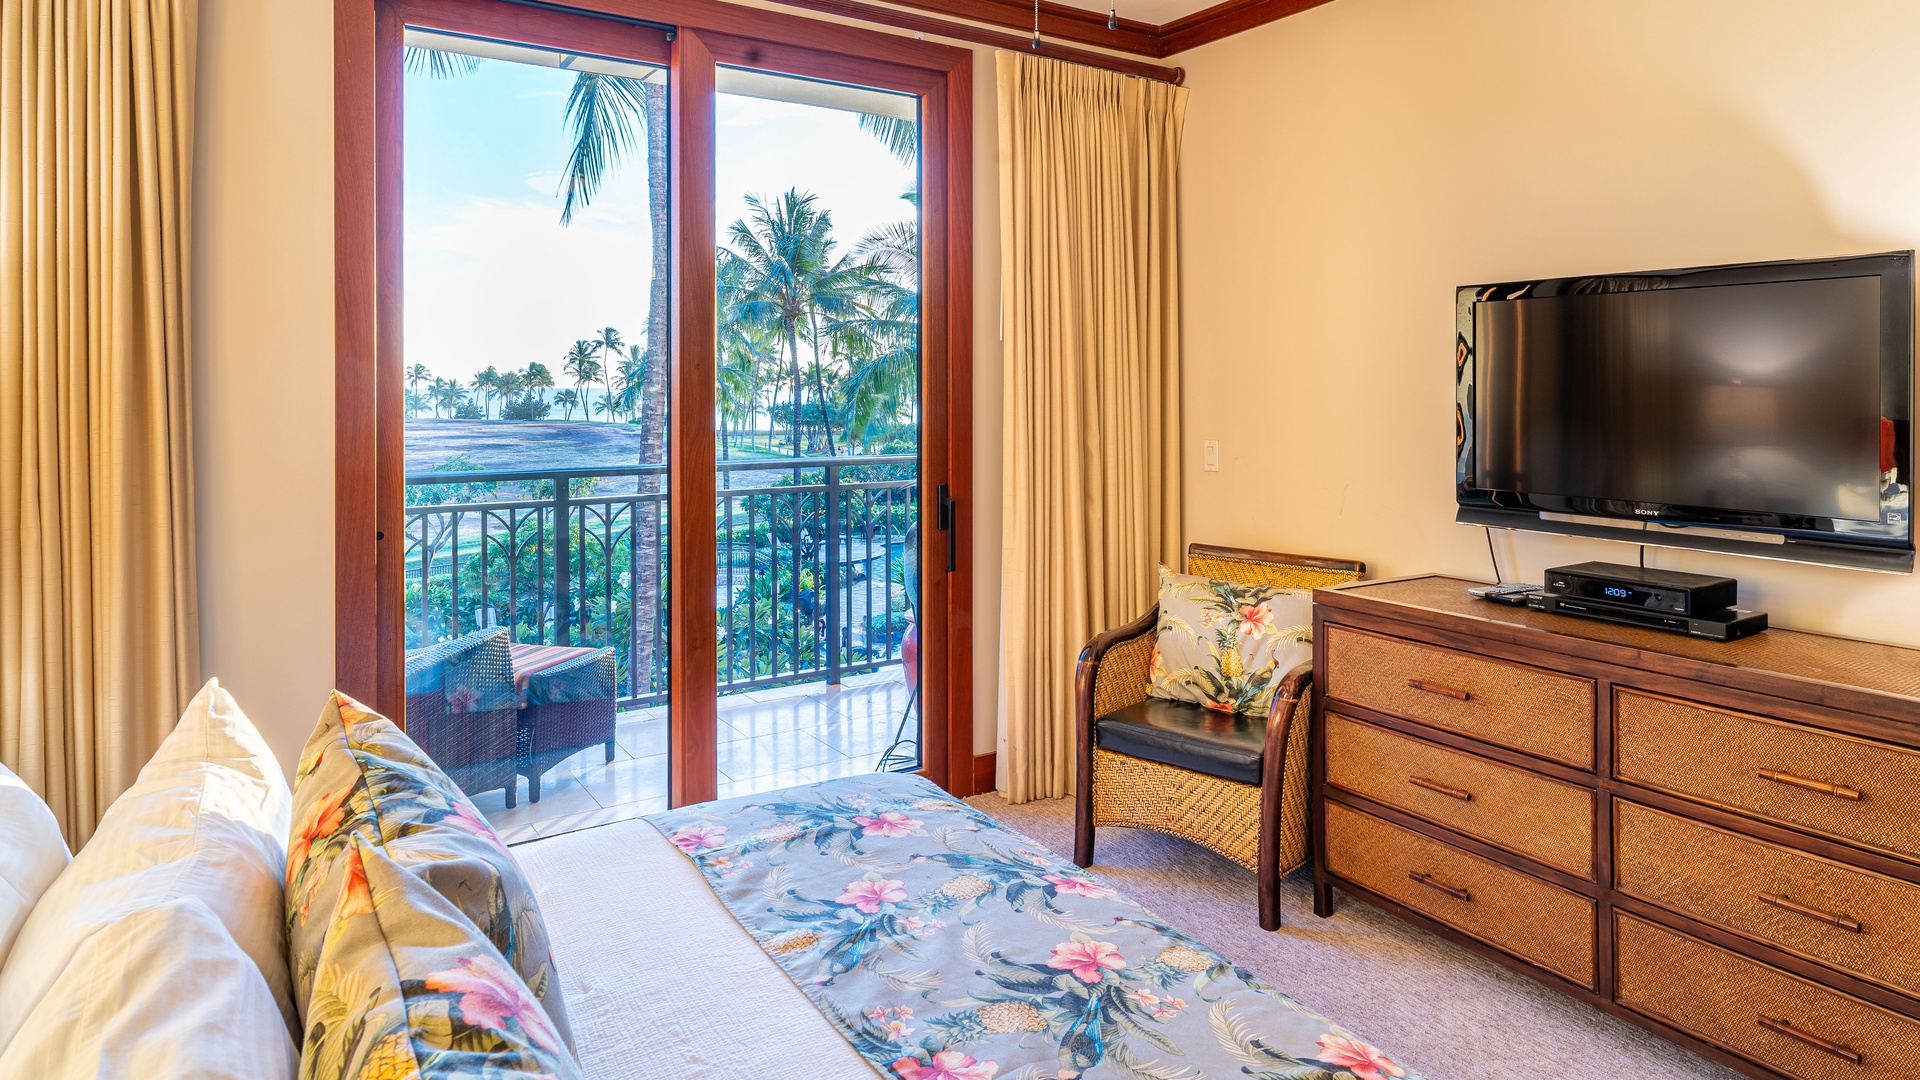 Kapolei Vacation Rentals, Ko Olina Beach Villas B301 - The primary guest bedroom with access to the lanai and storage.